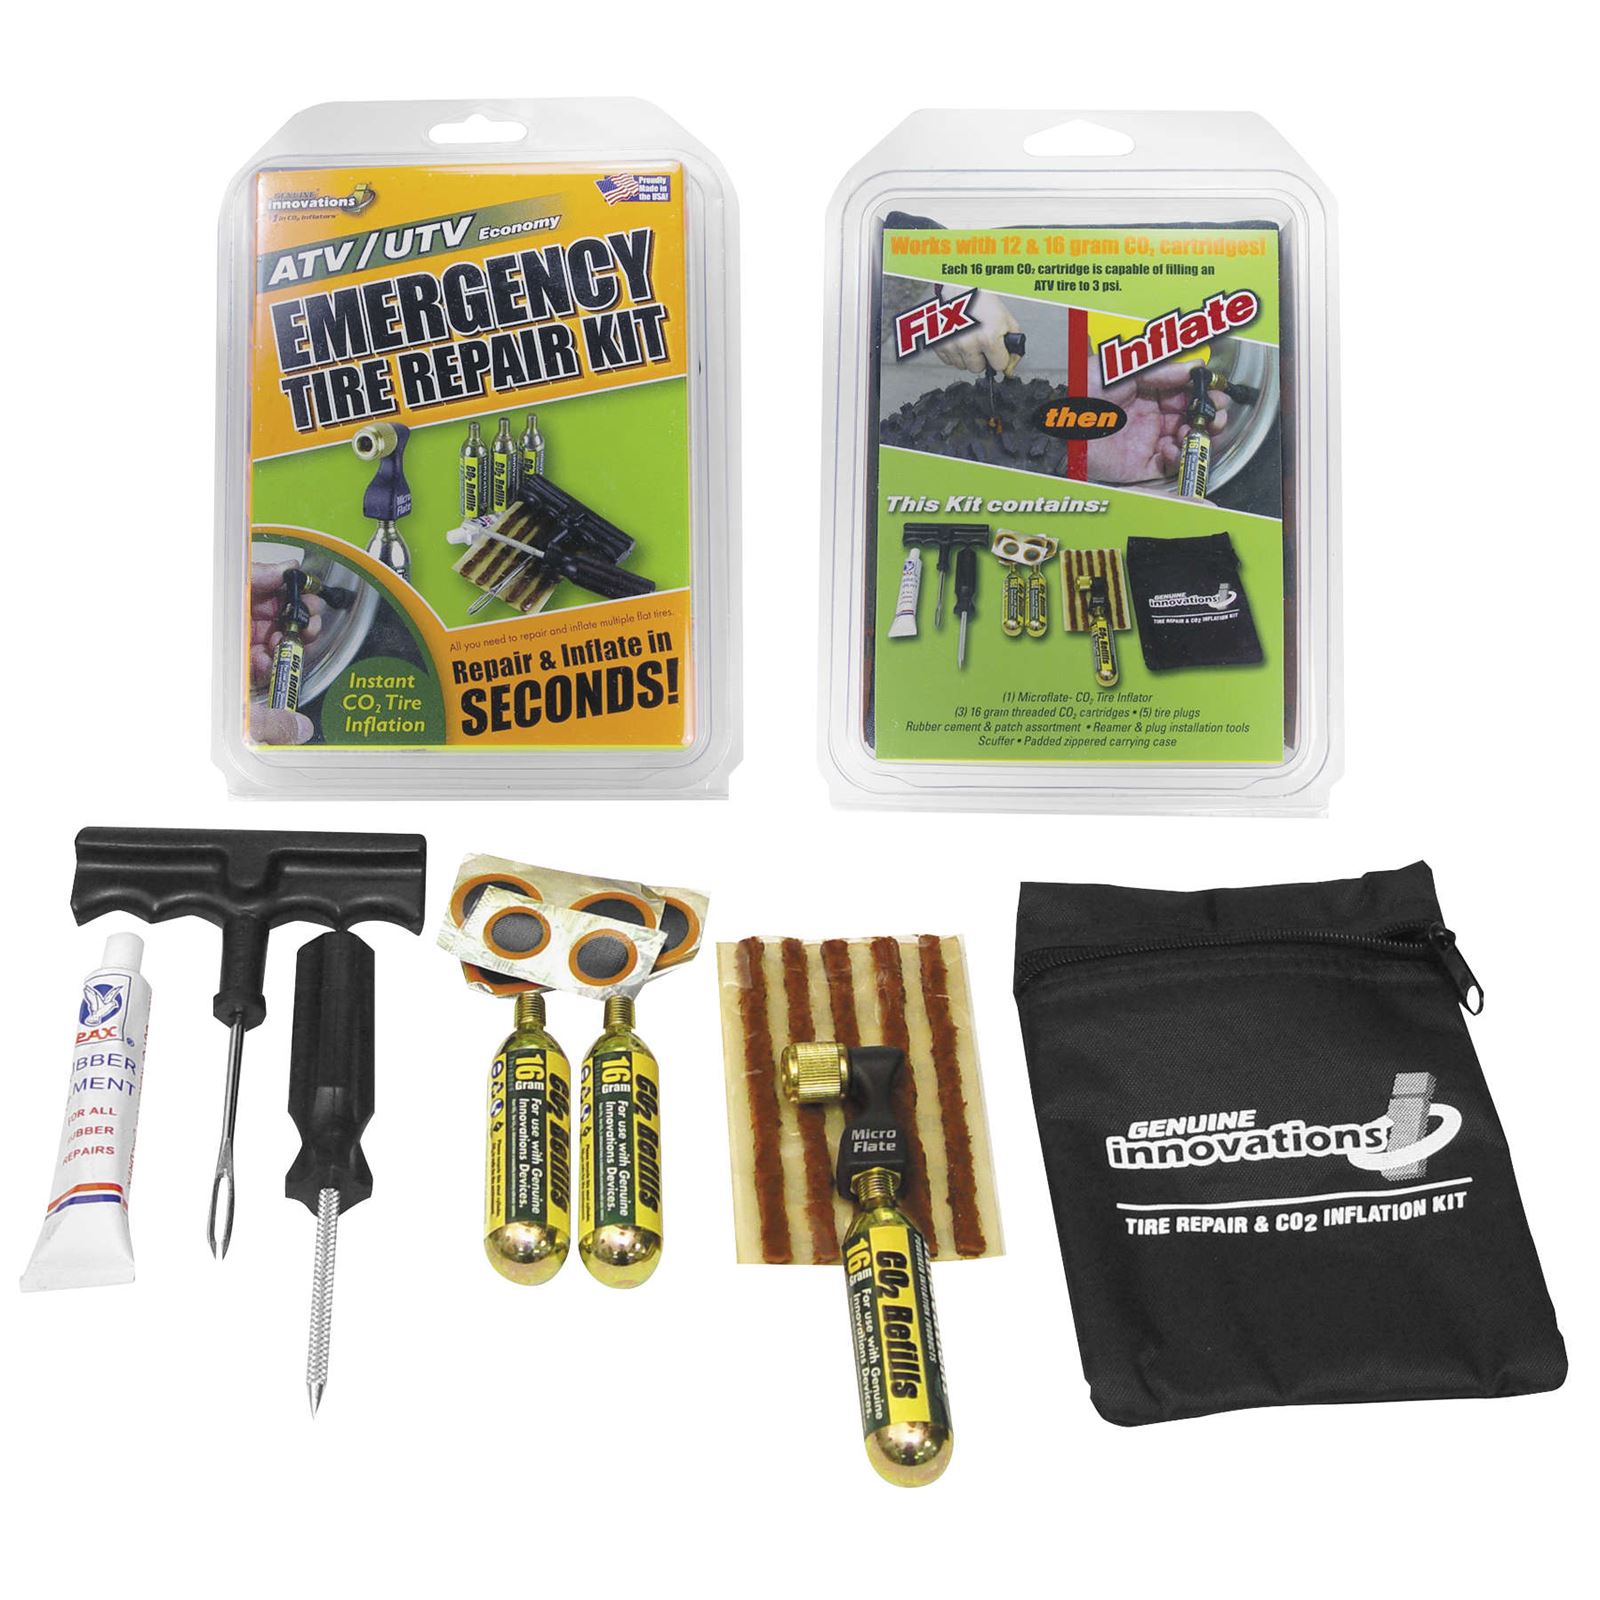 Innovations Economy Tire Repair & Inflation Kit